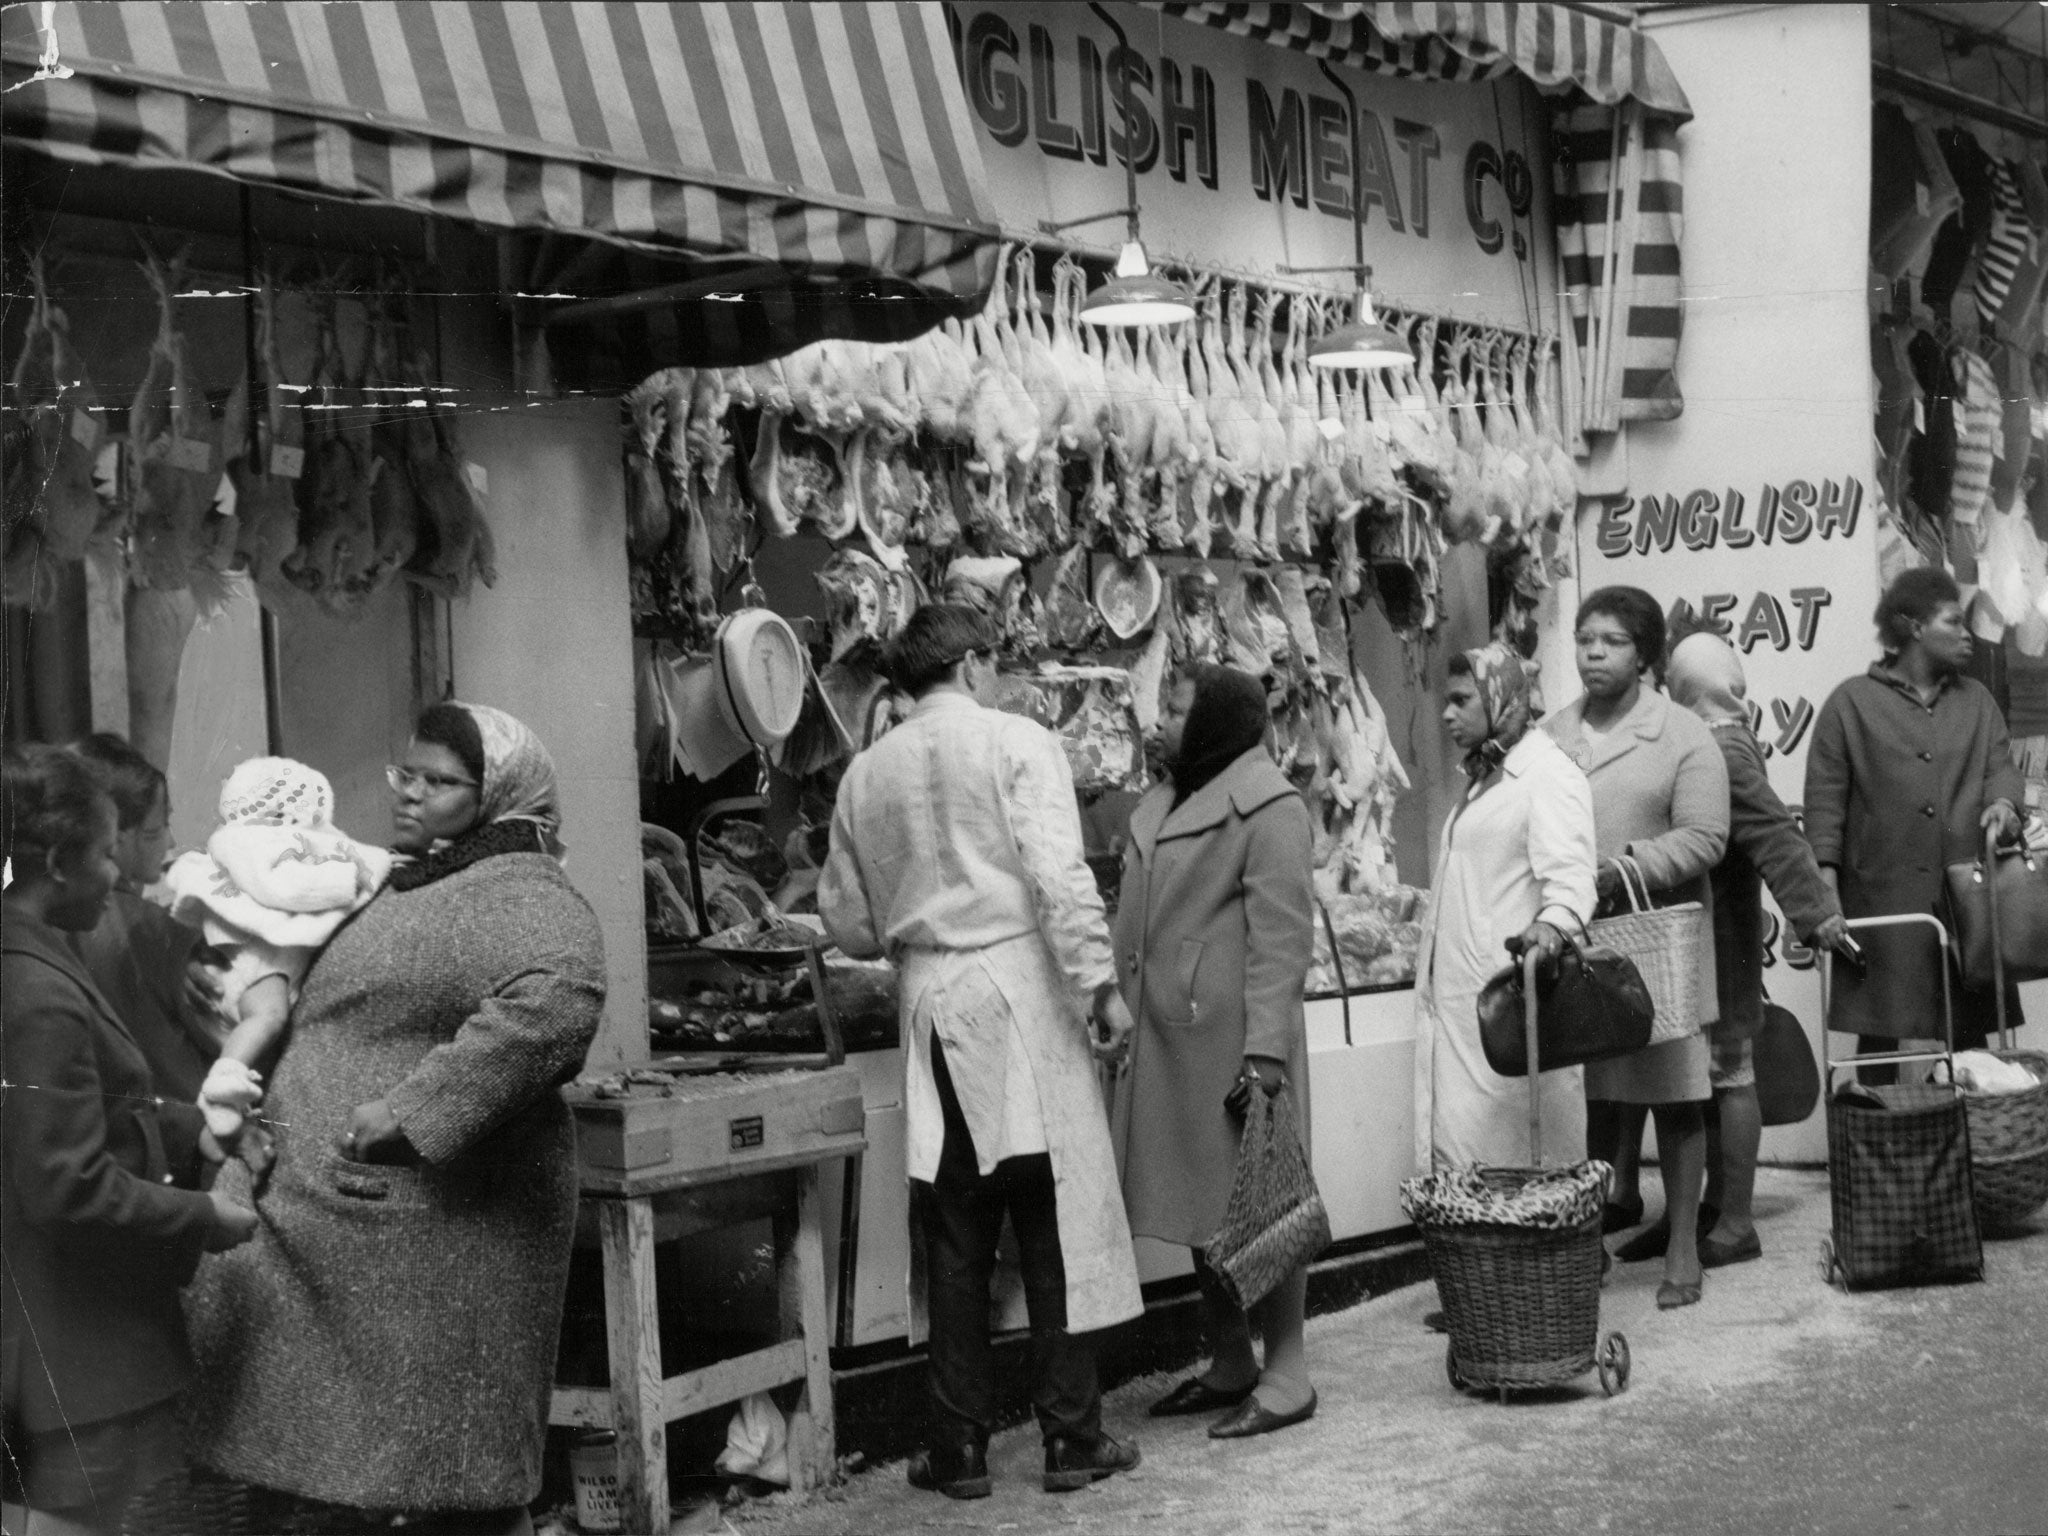 Shopping In Brixton market in 1968